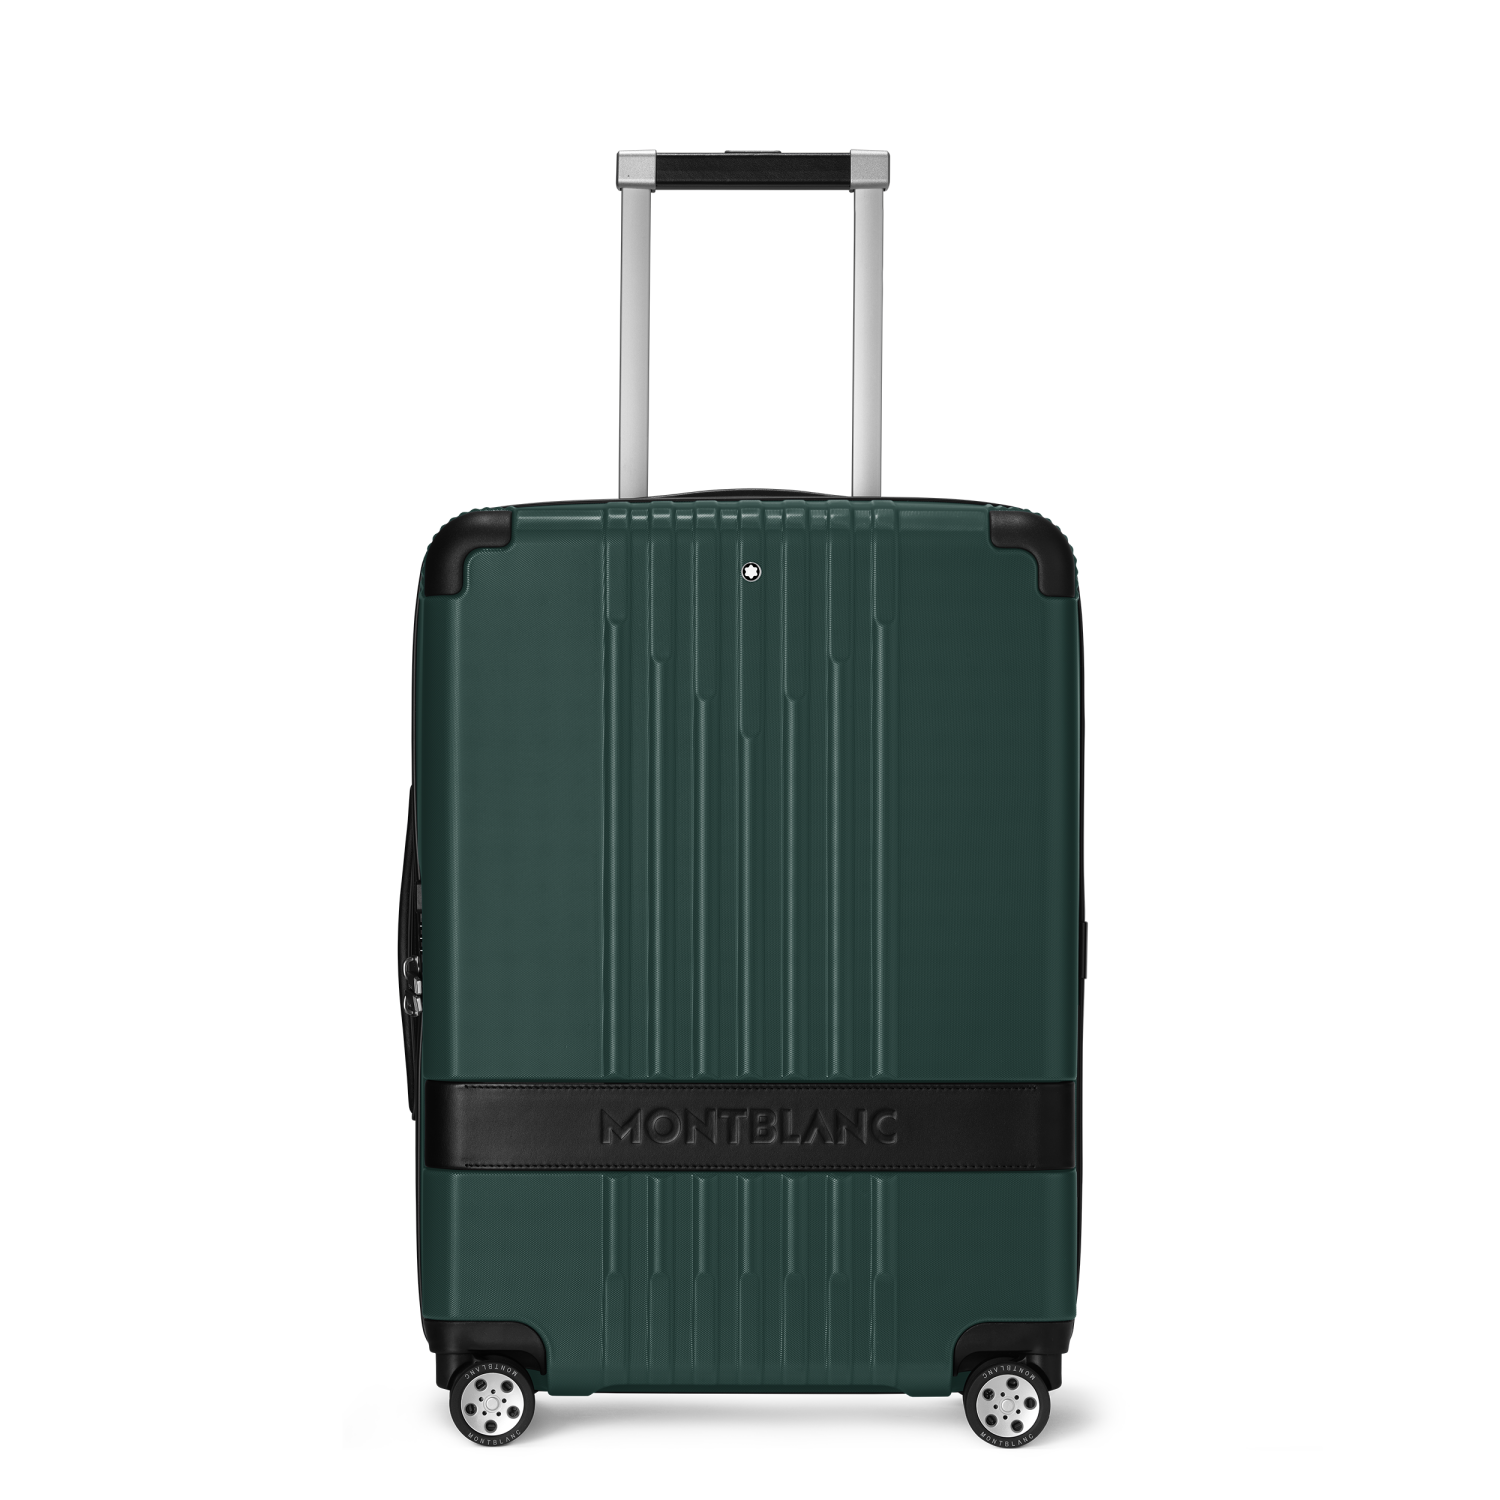 Montblanc expands its #MY4810 luggage collection with new shades of trolleys for business travellers seeking elegant yet functional travel solutions.